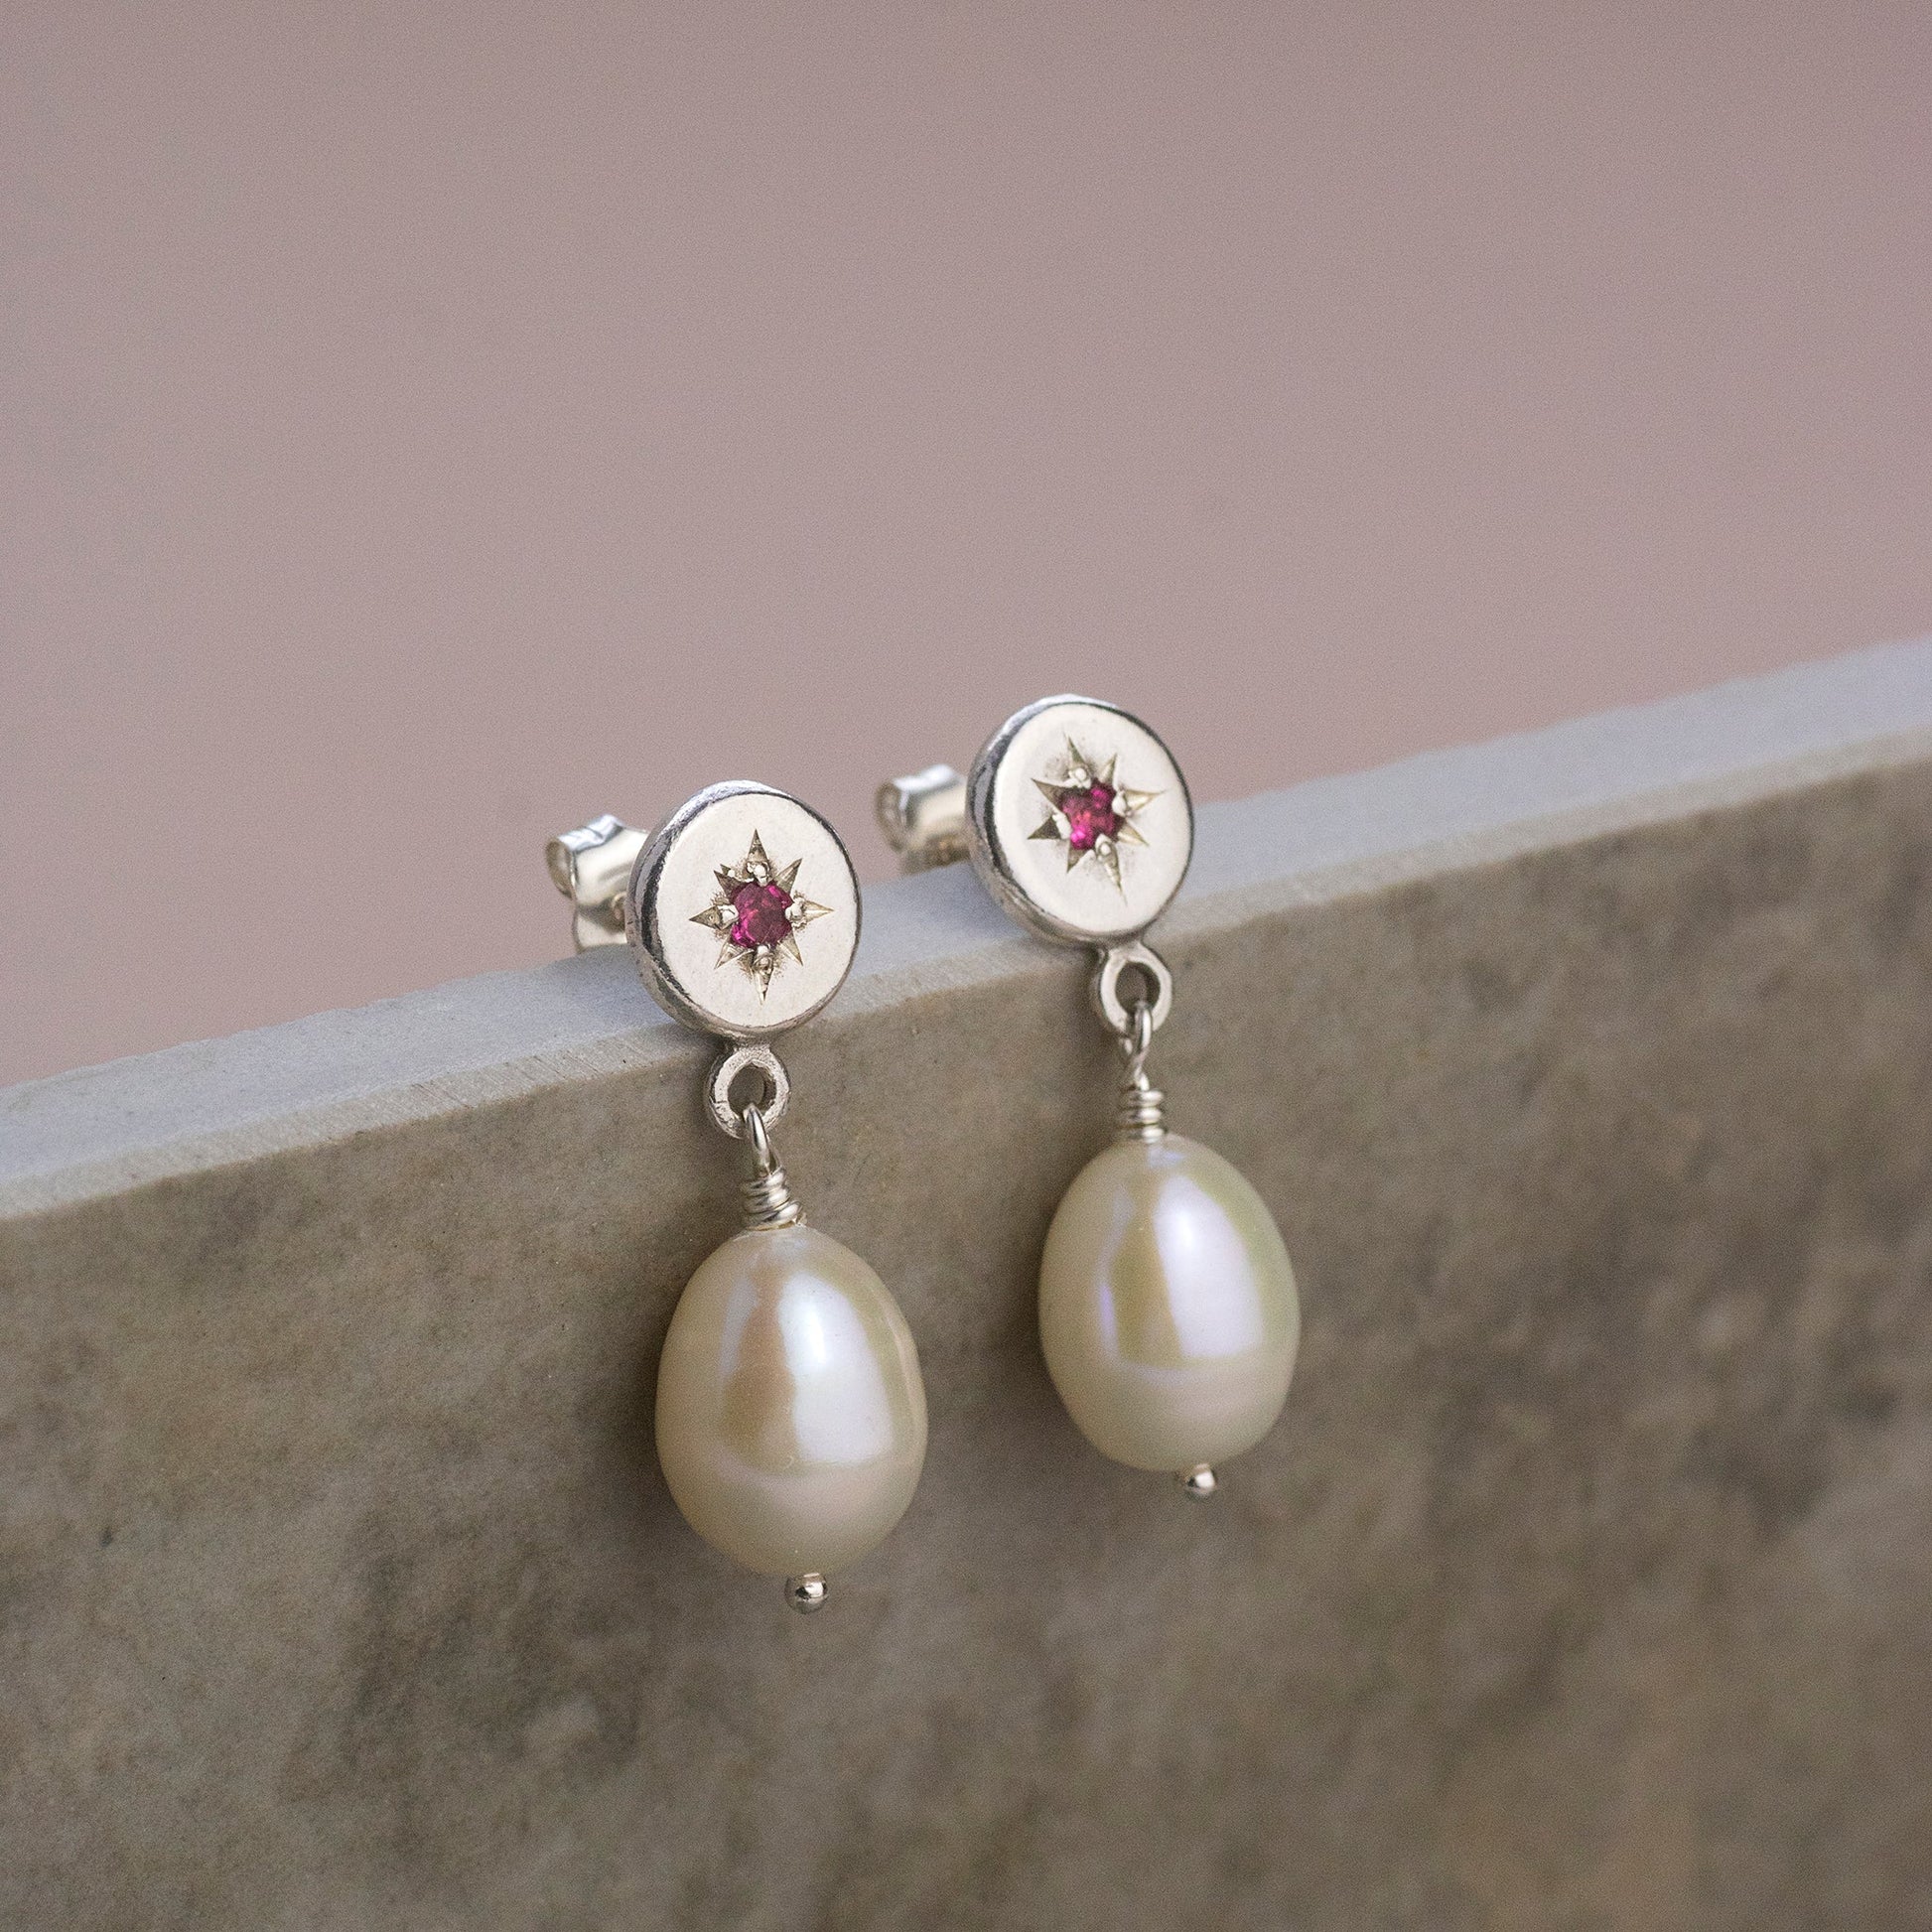 Gift for Niece - Star Set Birthstone Earrings with Pearls - Silver